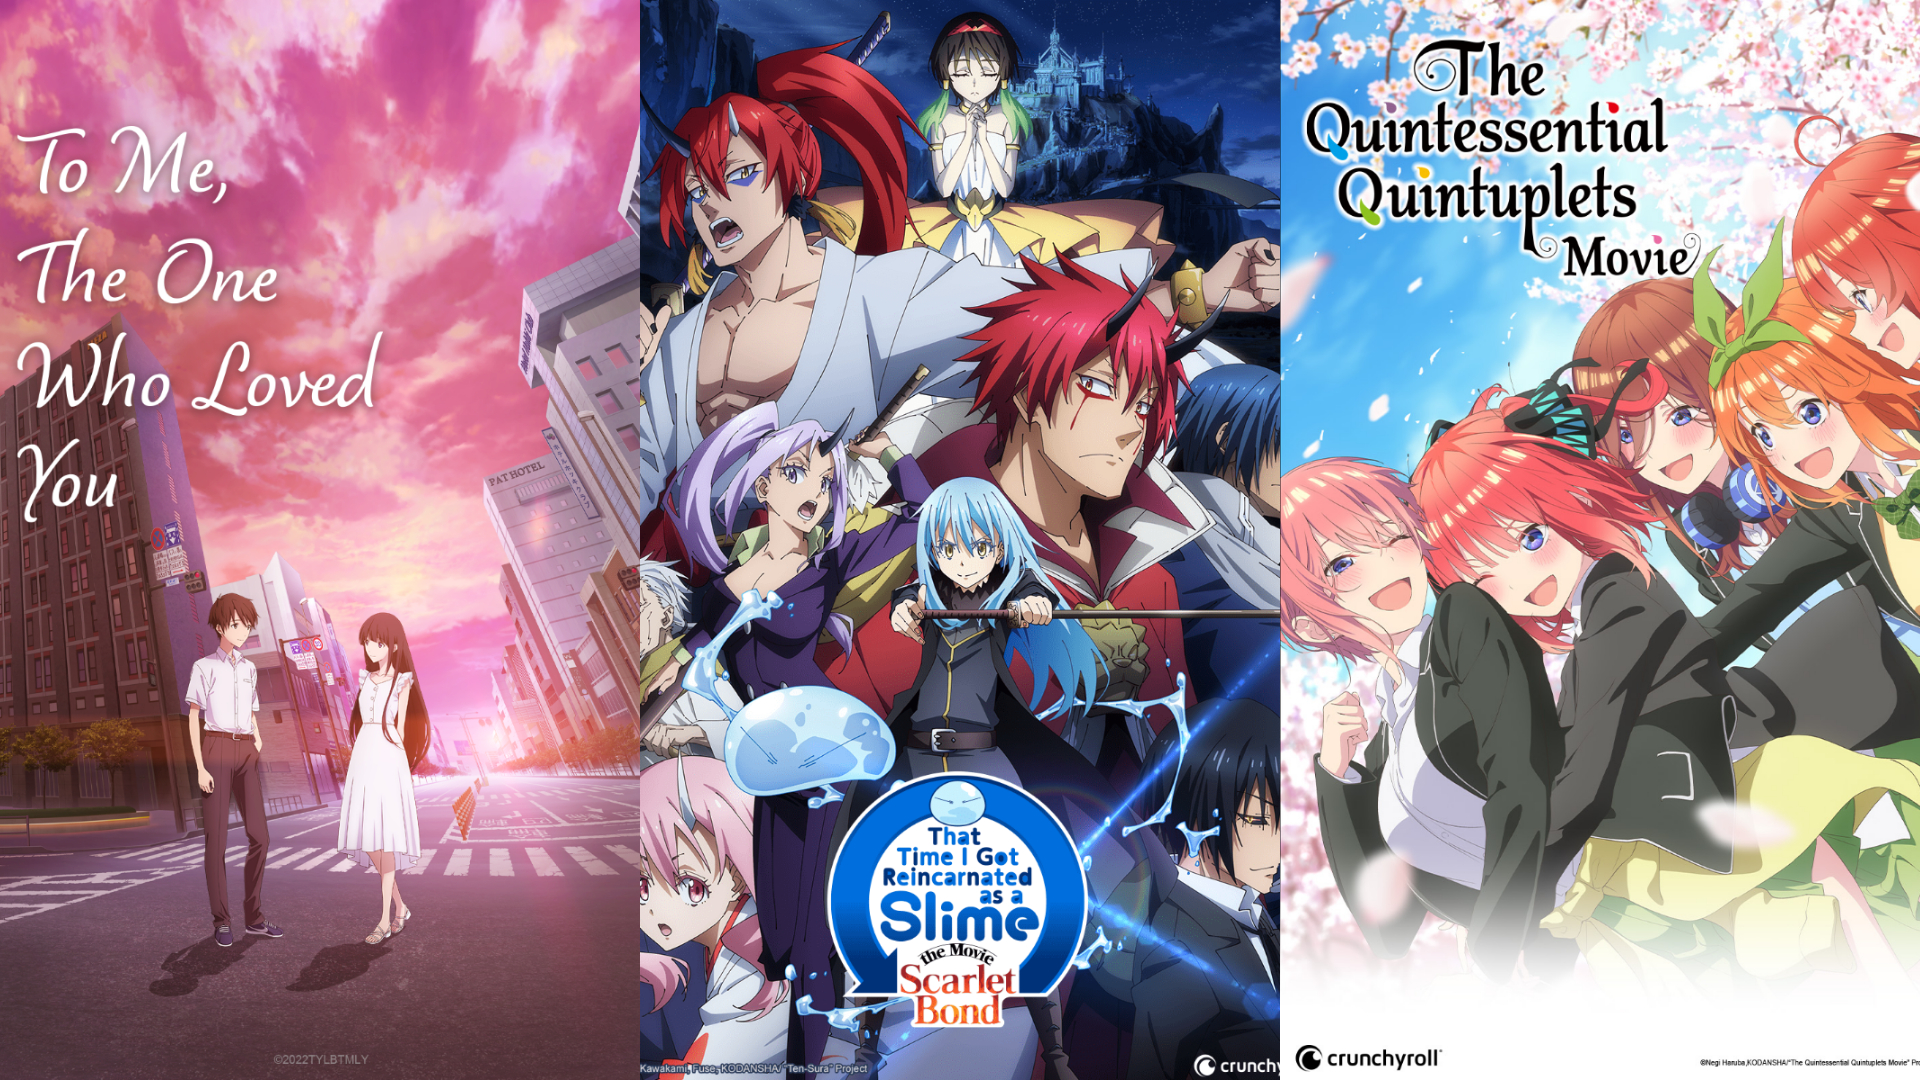 Watch That Time I Got Reincarnated as a Slime The Movie: Scarlet Bond, The  Quintessential Quintuplets Movie and More Anime Movies on Crunchyroll This  April [UPDATED] - Crunchyroll News